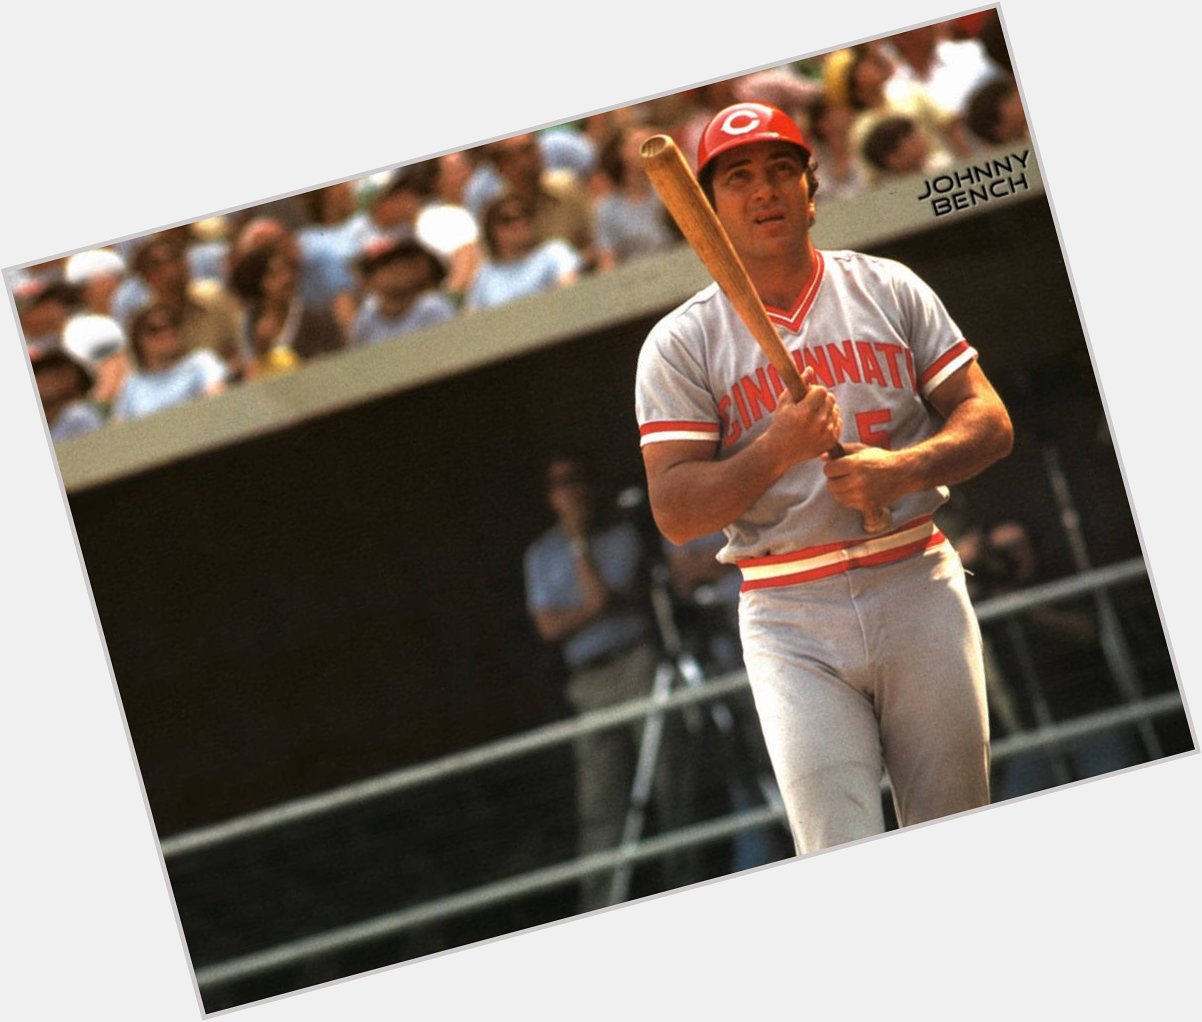 Happy Birthday to Johnny Bench, who turns 68 today! 